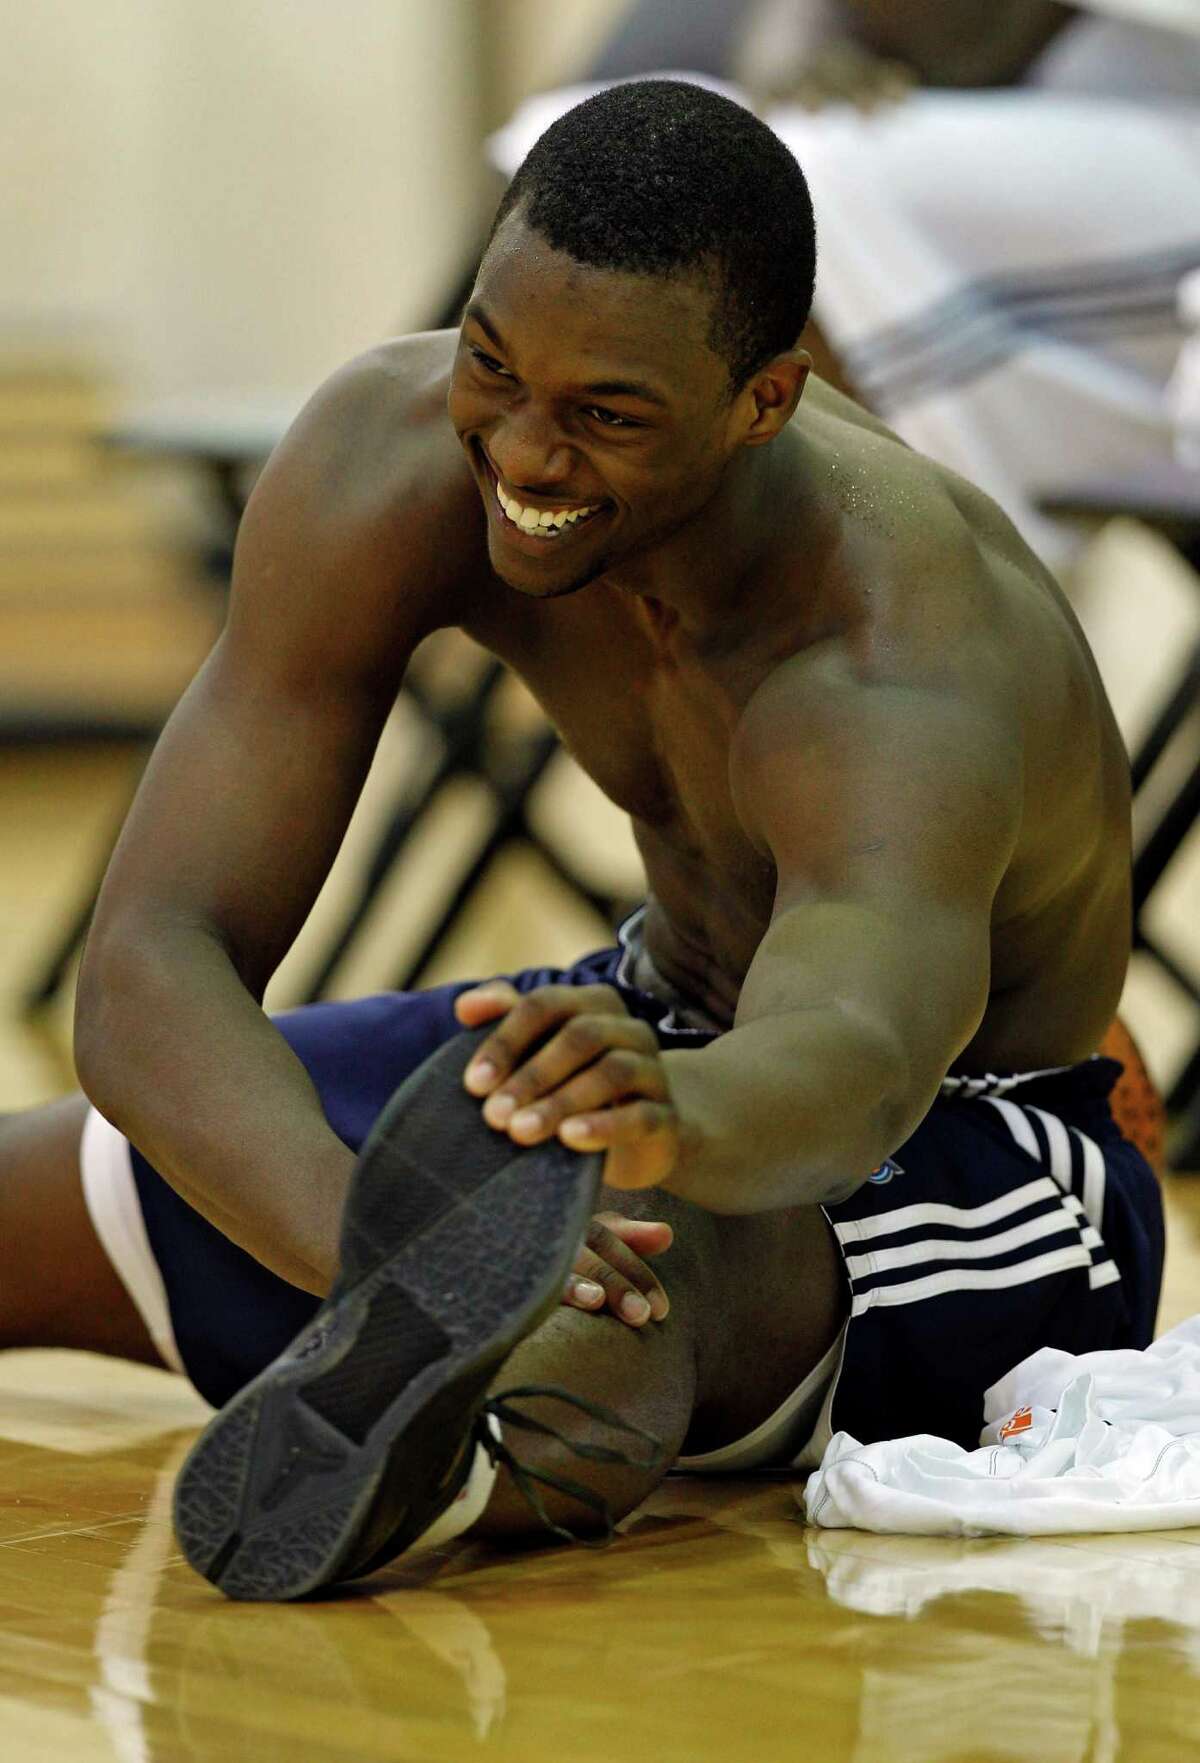 Harrison Barnes stretches after a pre-draft workout for the Charlotte Bobcats NBA basketball team in Charlotte, N.C., Thursday, June 21, 2012.